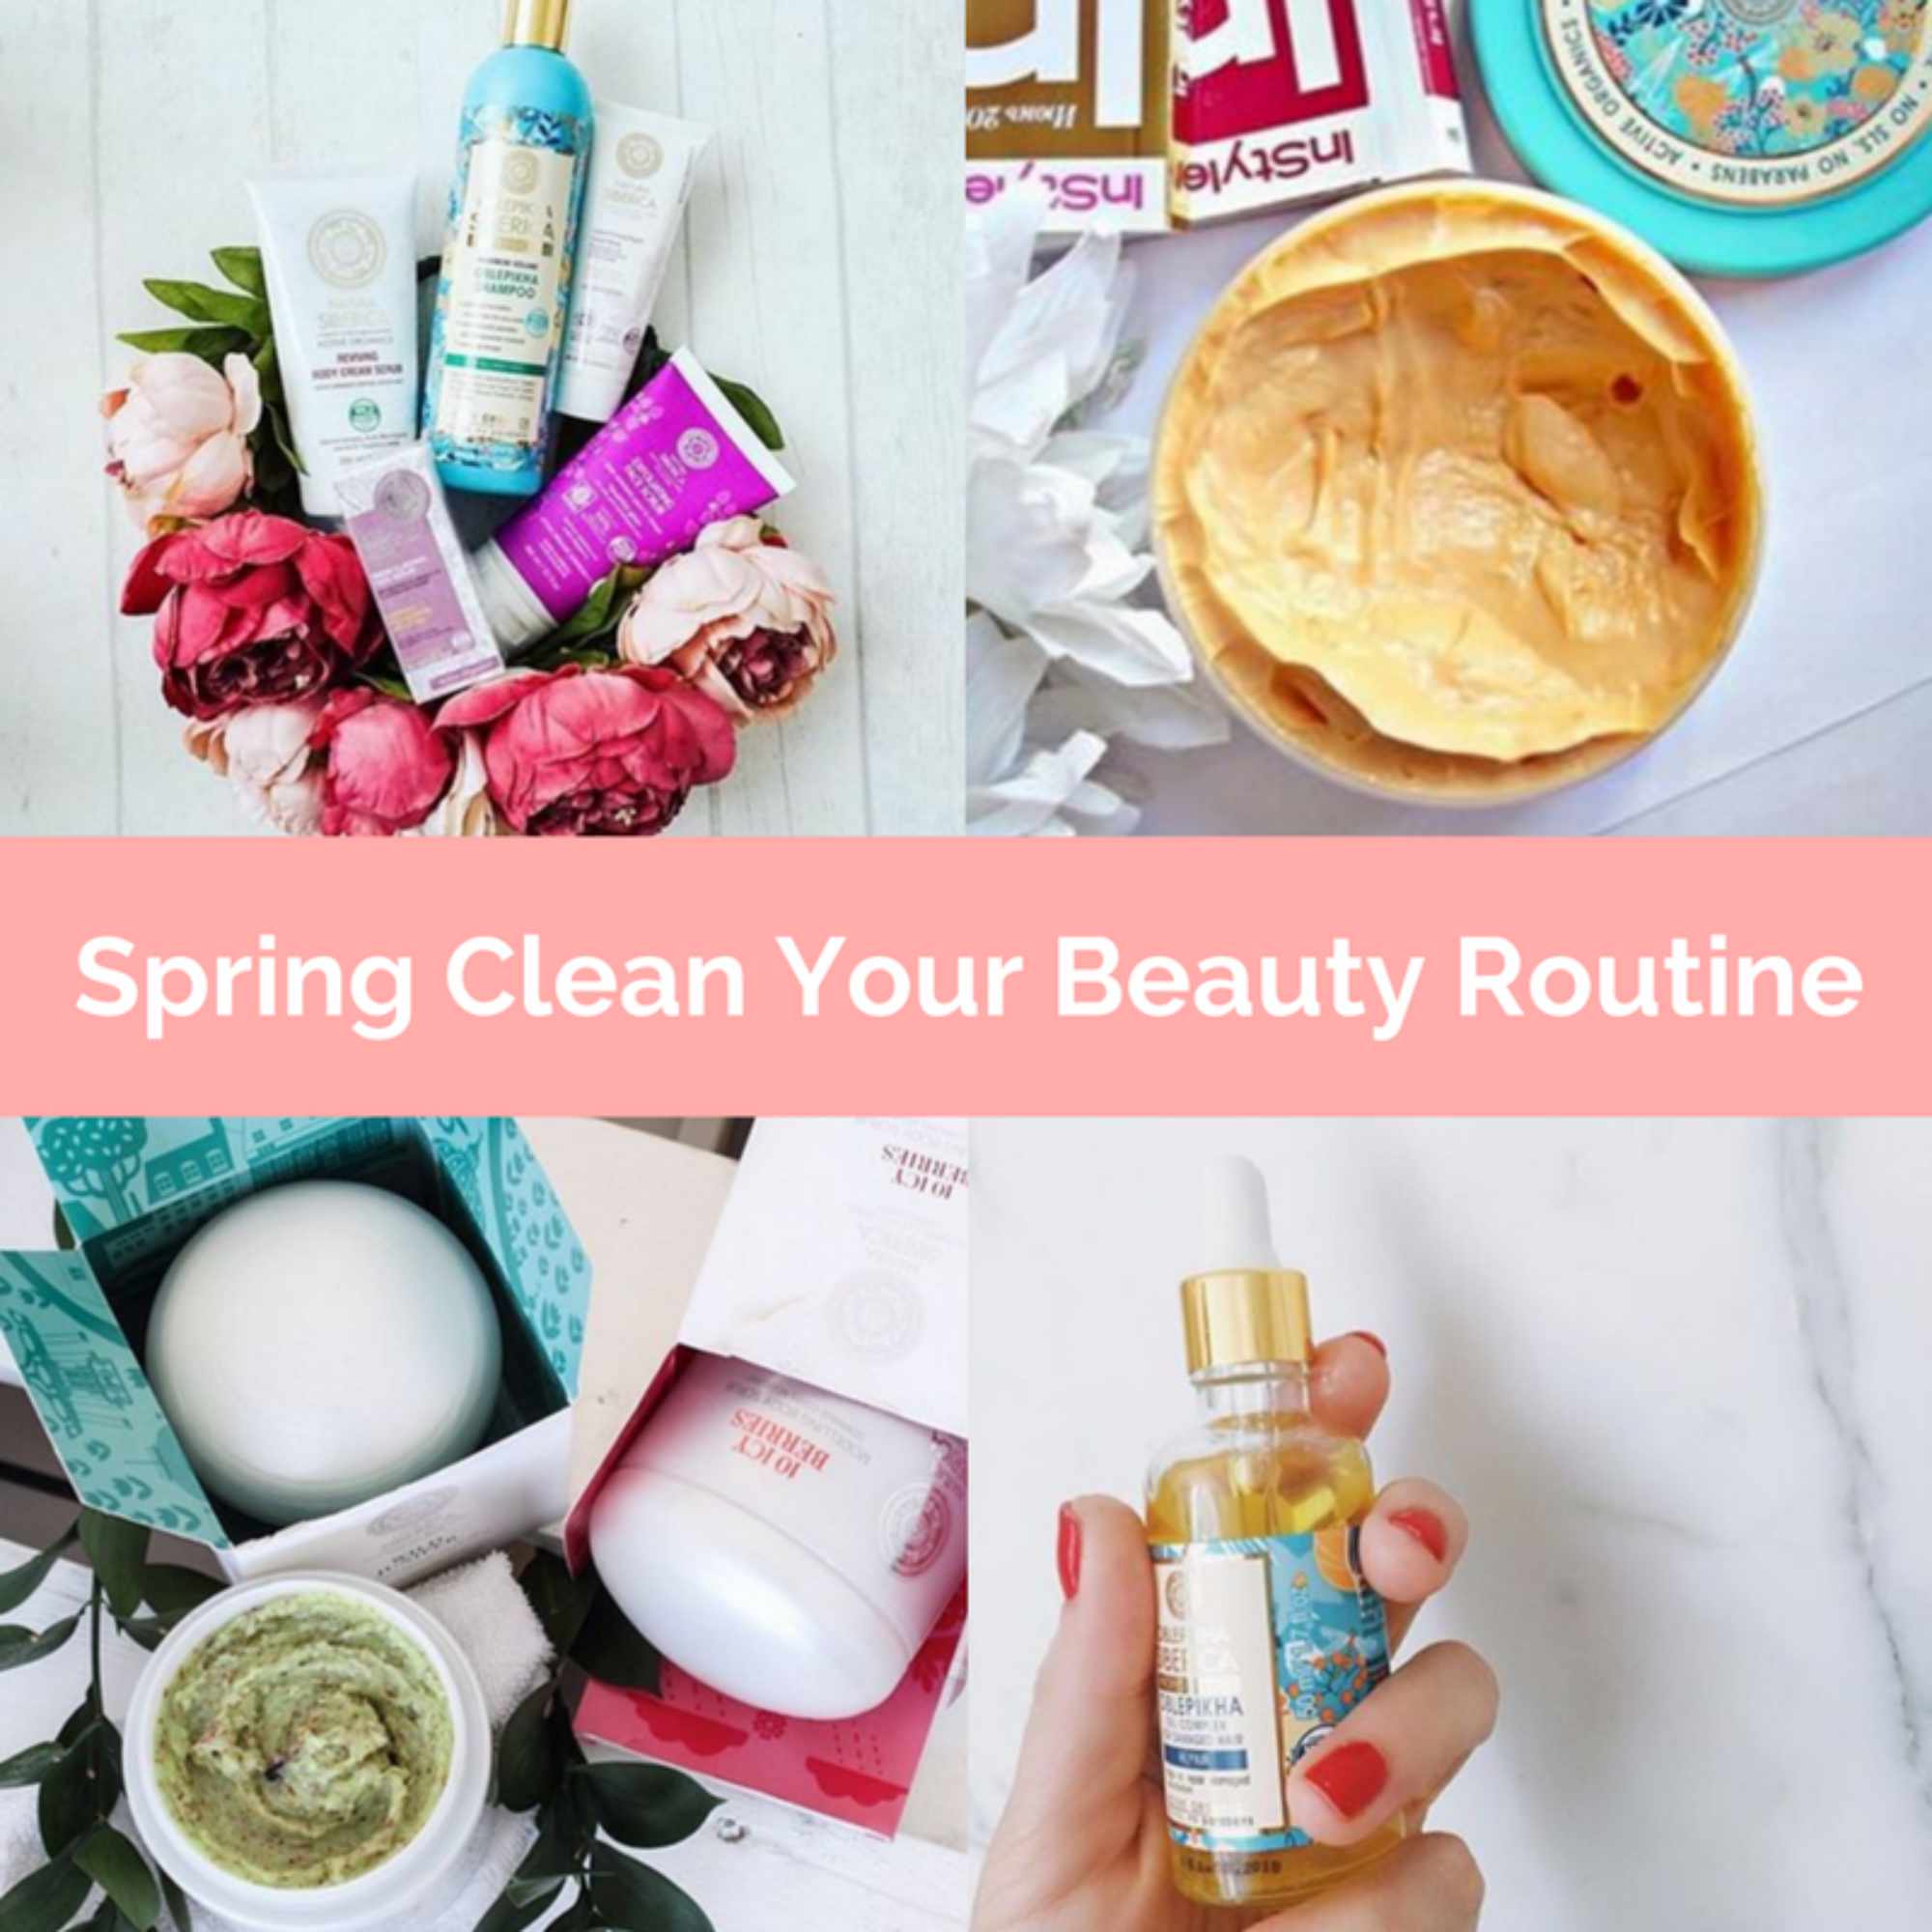 Spring Clean Your Beauty Routine with Natura Siberica